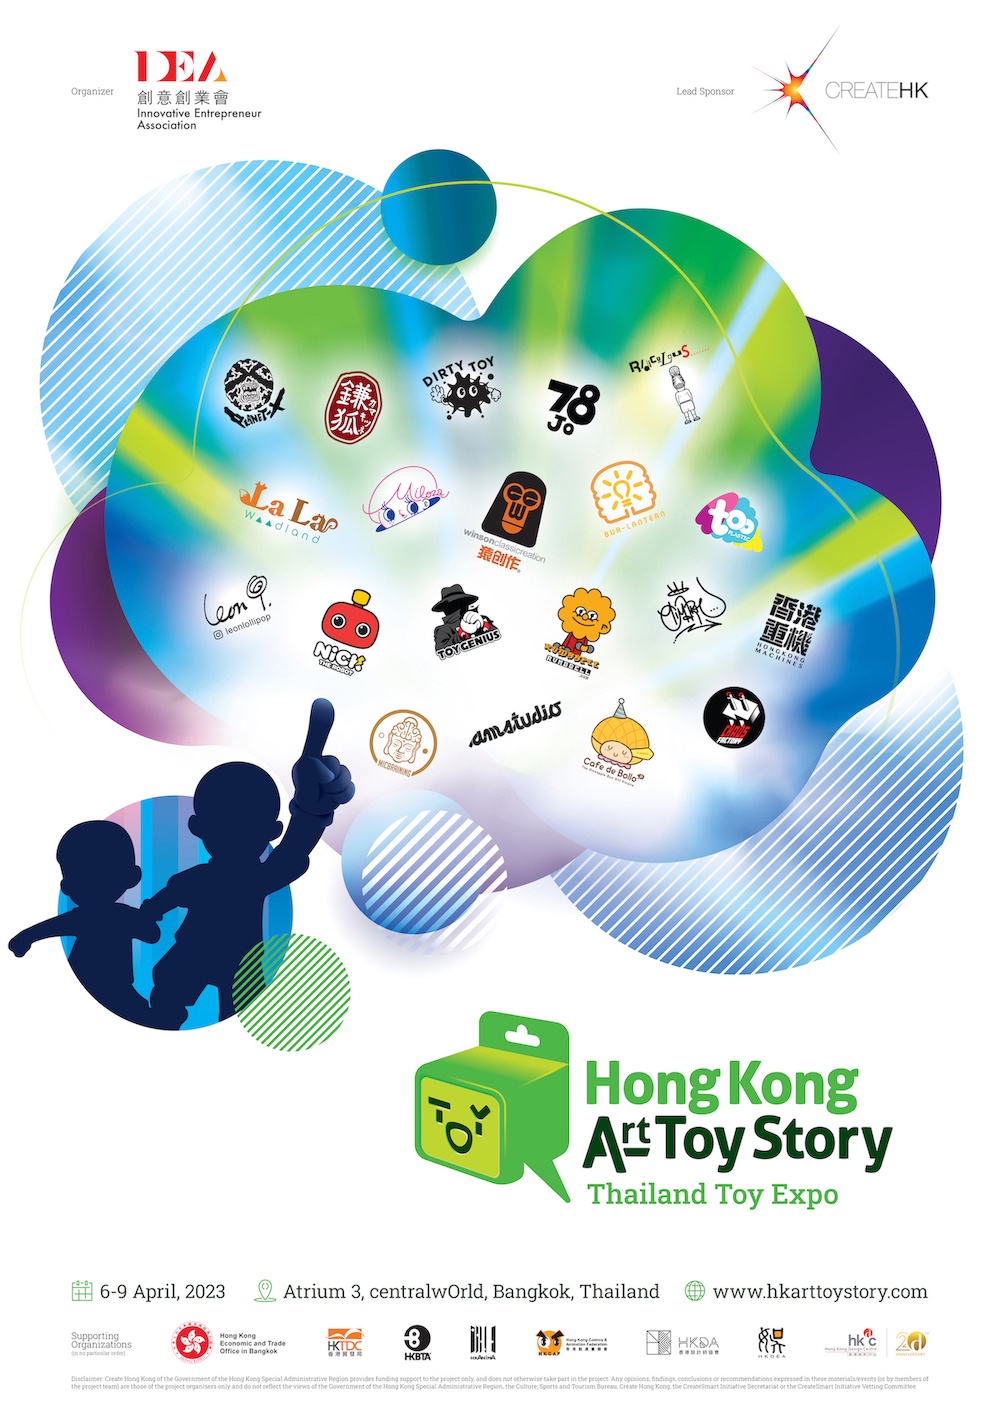 Hong Kong Art Toy Story is gearing up to rock the first Hong Kong Pavilion in Thailandwith original art toys that will be grandly displayed at Thailand Toy Expo 2023